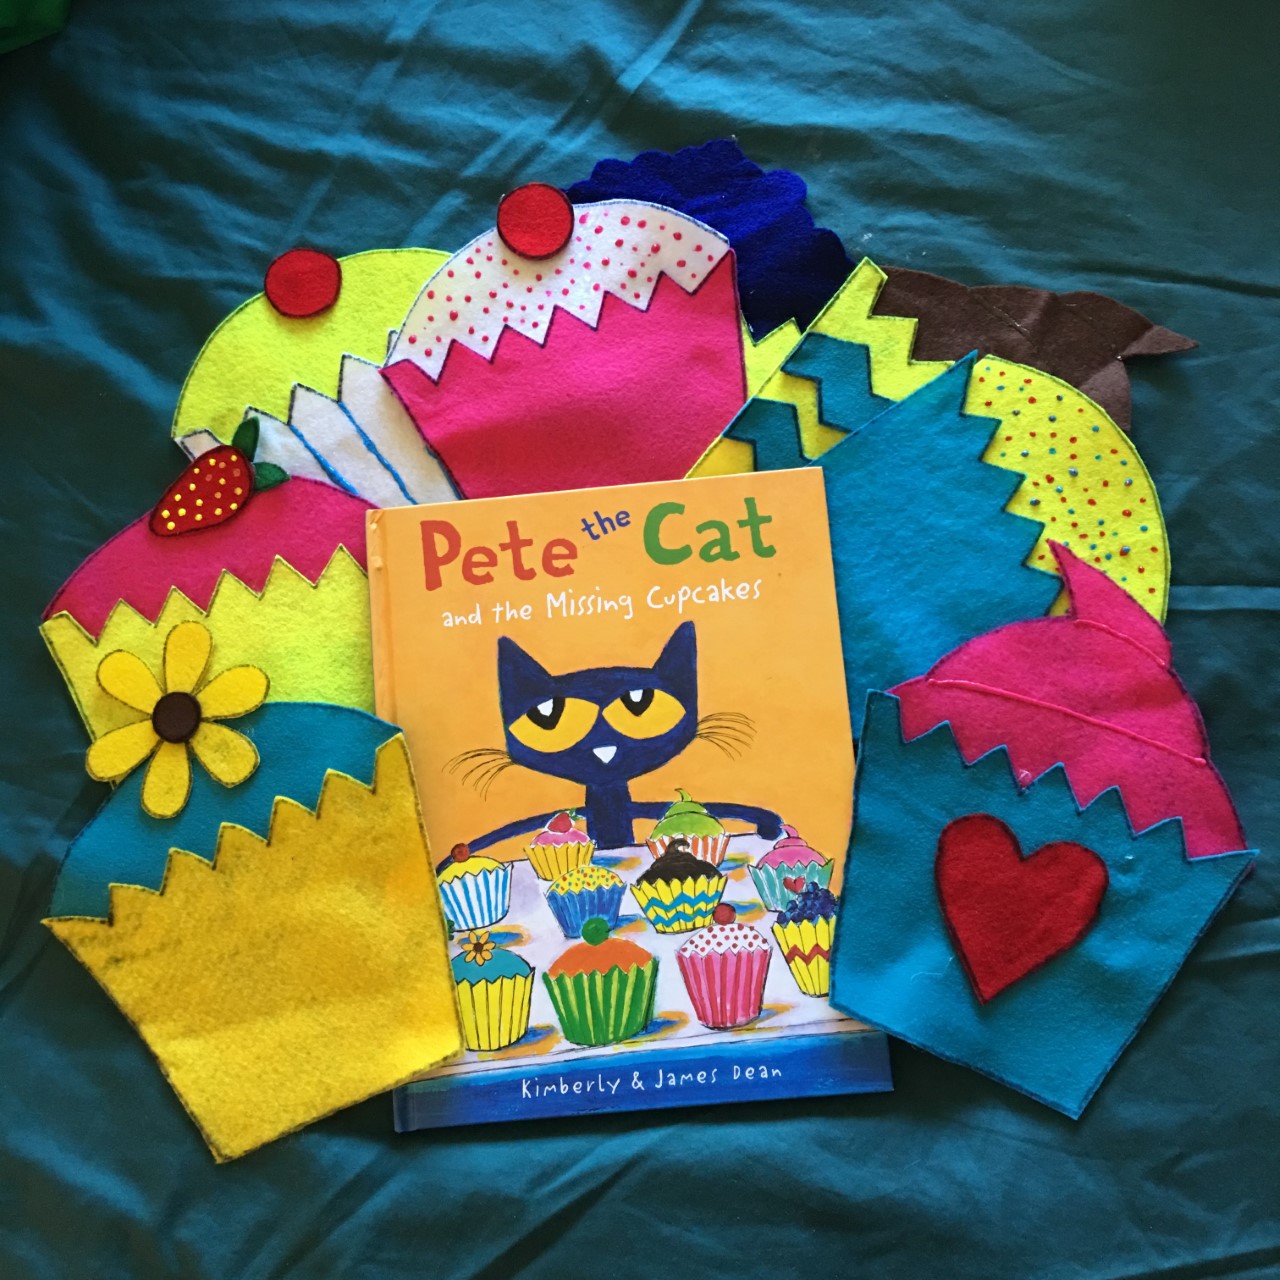 Storytime with Miss Tara and Friends: Pete the Cat and the Missing Cupcakes